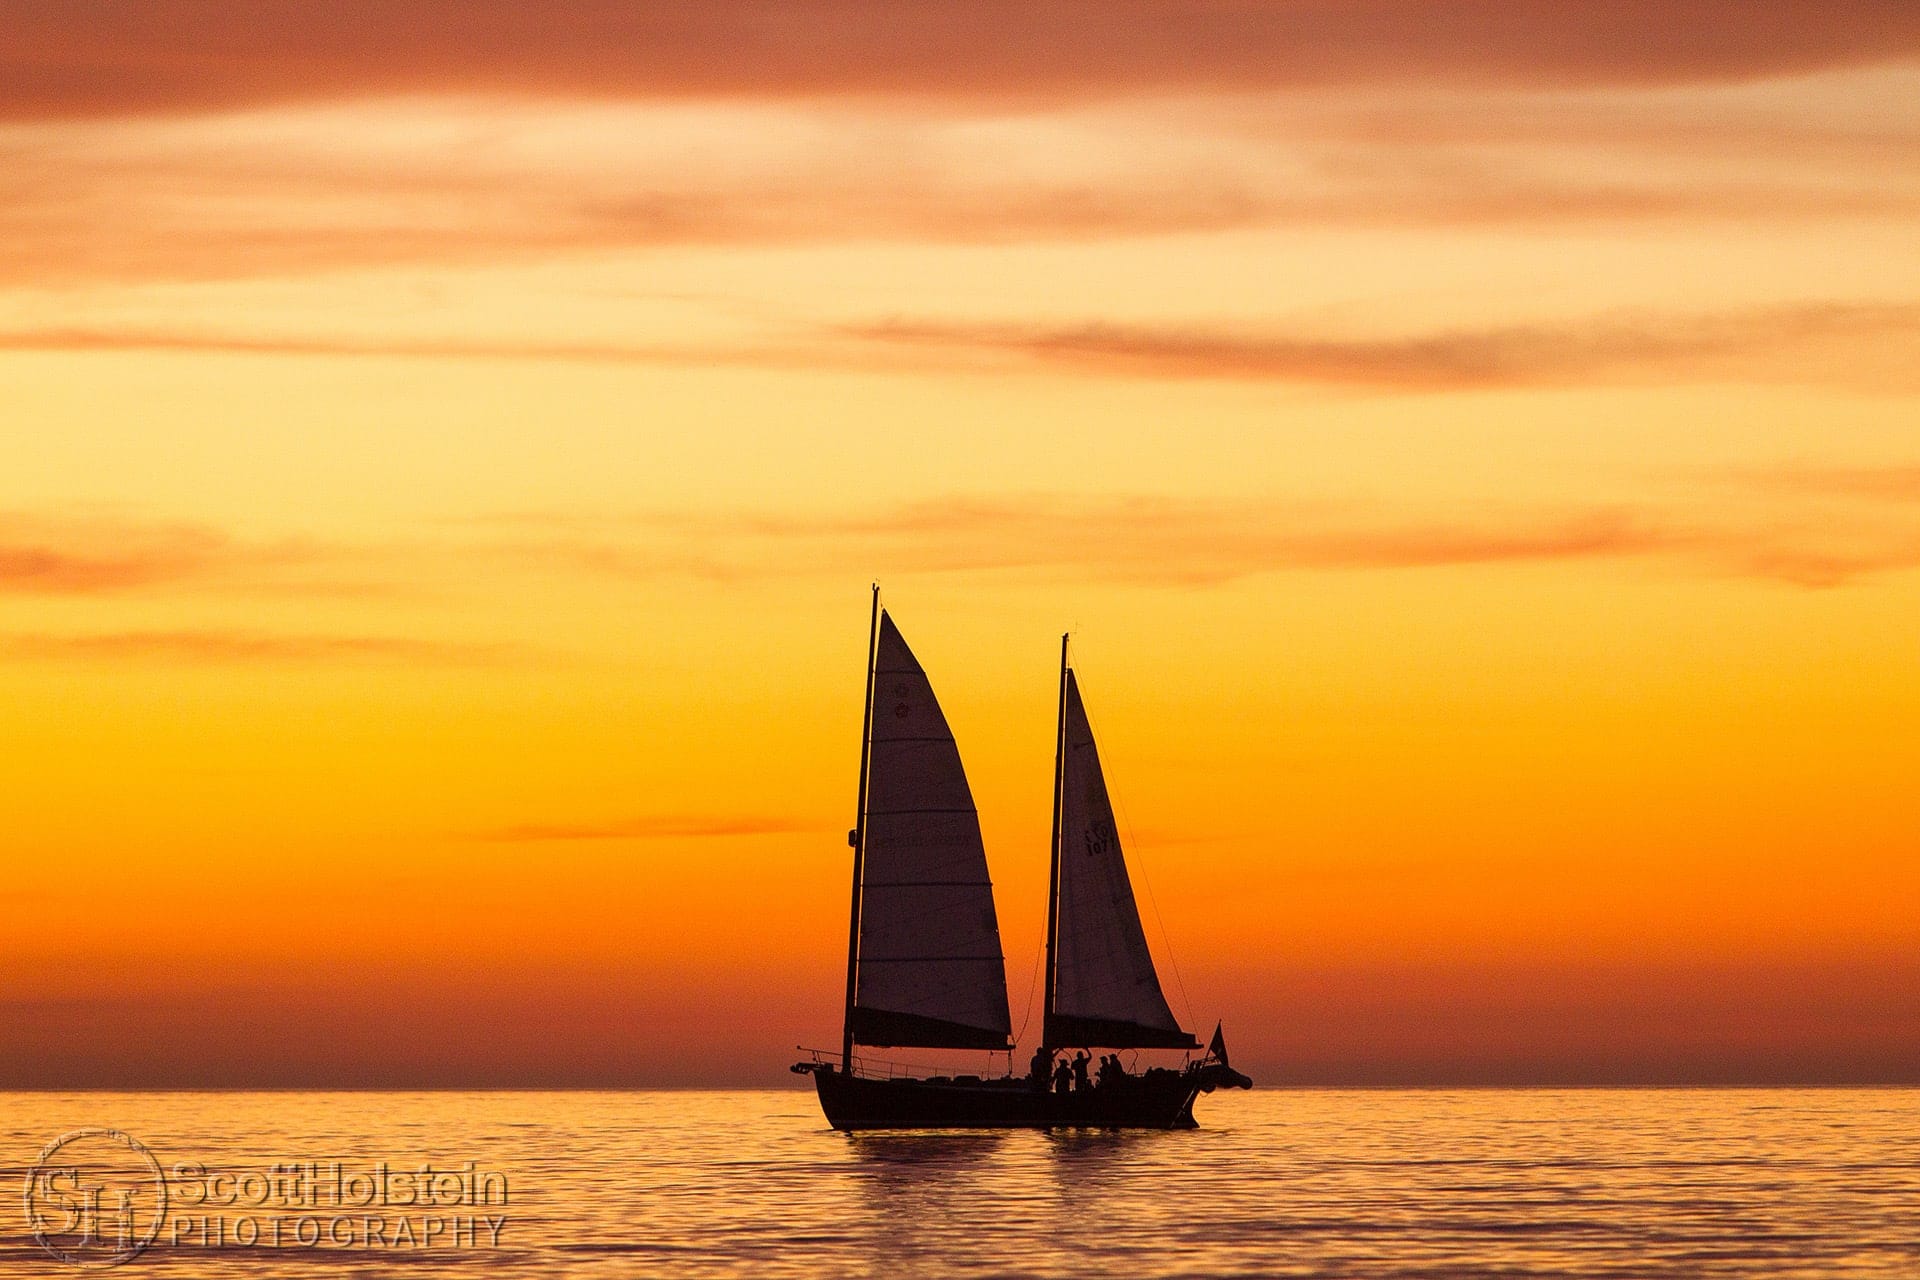 A sailboat is silhouetted in front of the afterglow of a yellow and orange sunset in the Gulf of Mexico in Venice, Florida.